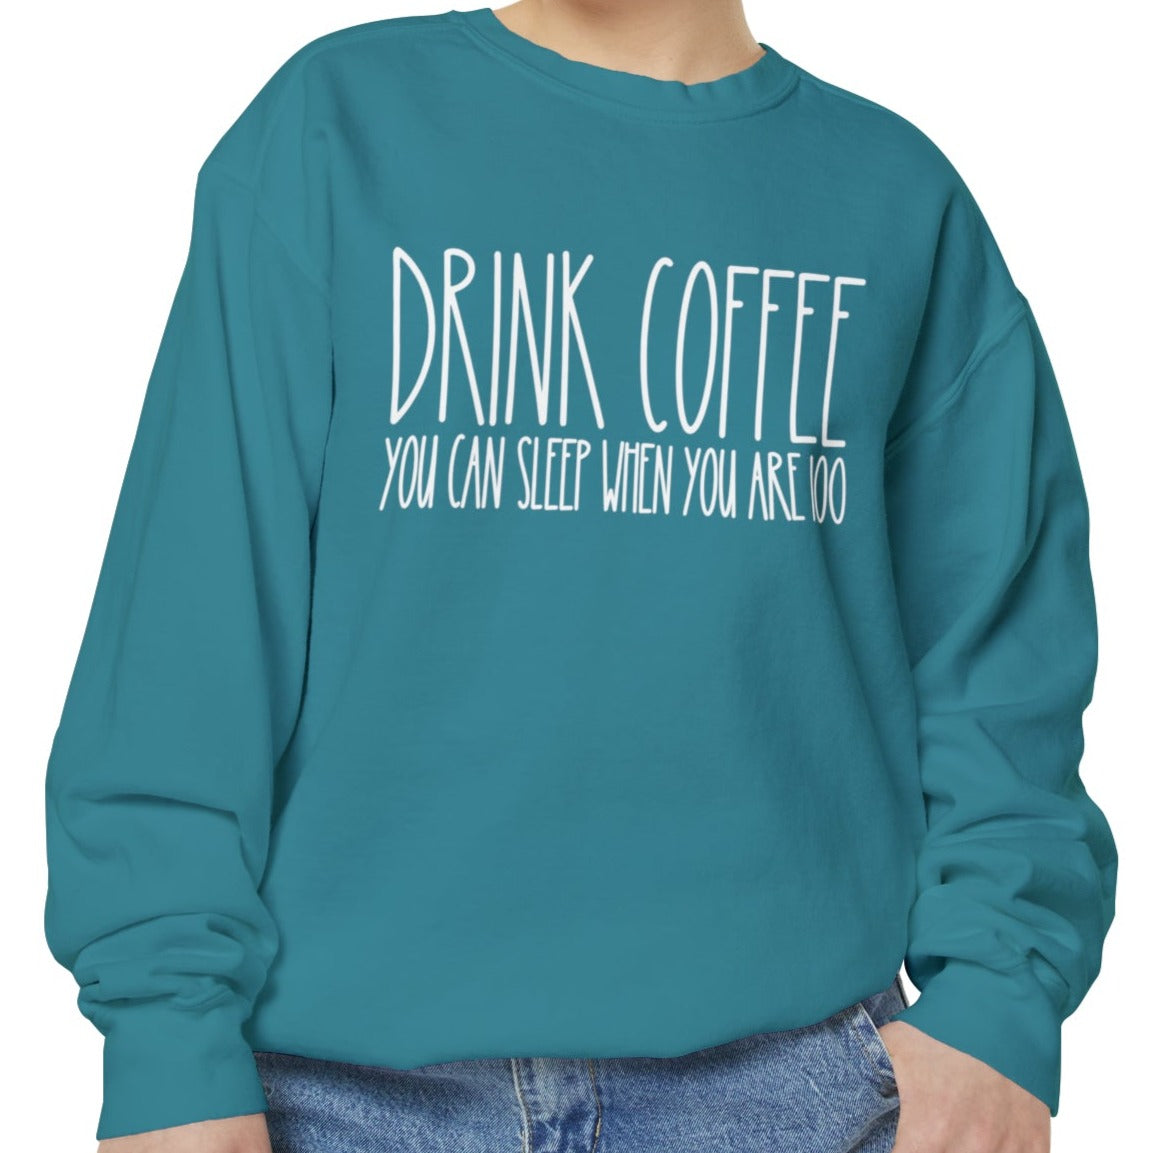 Drink Coffee: You Can Sleep When You're 100 - Women's Comfort Color Sweatshirt for Caffeine Enthusiasts - Eddy and Rita